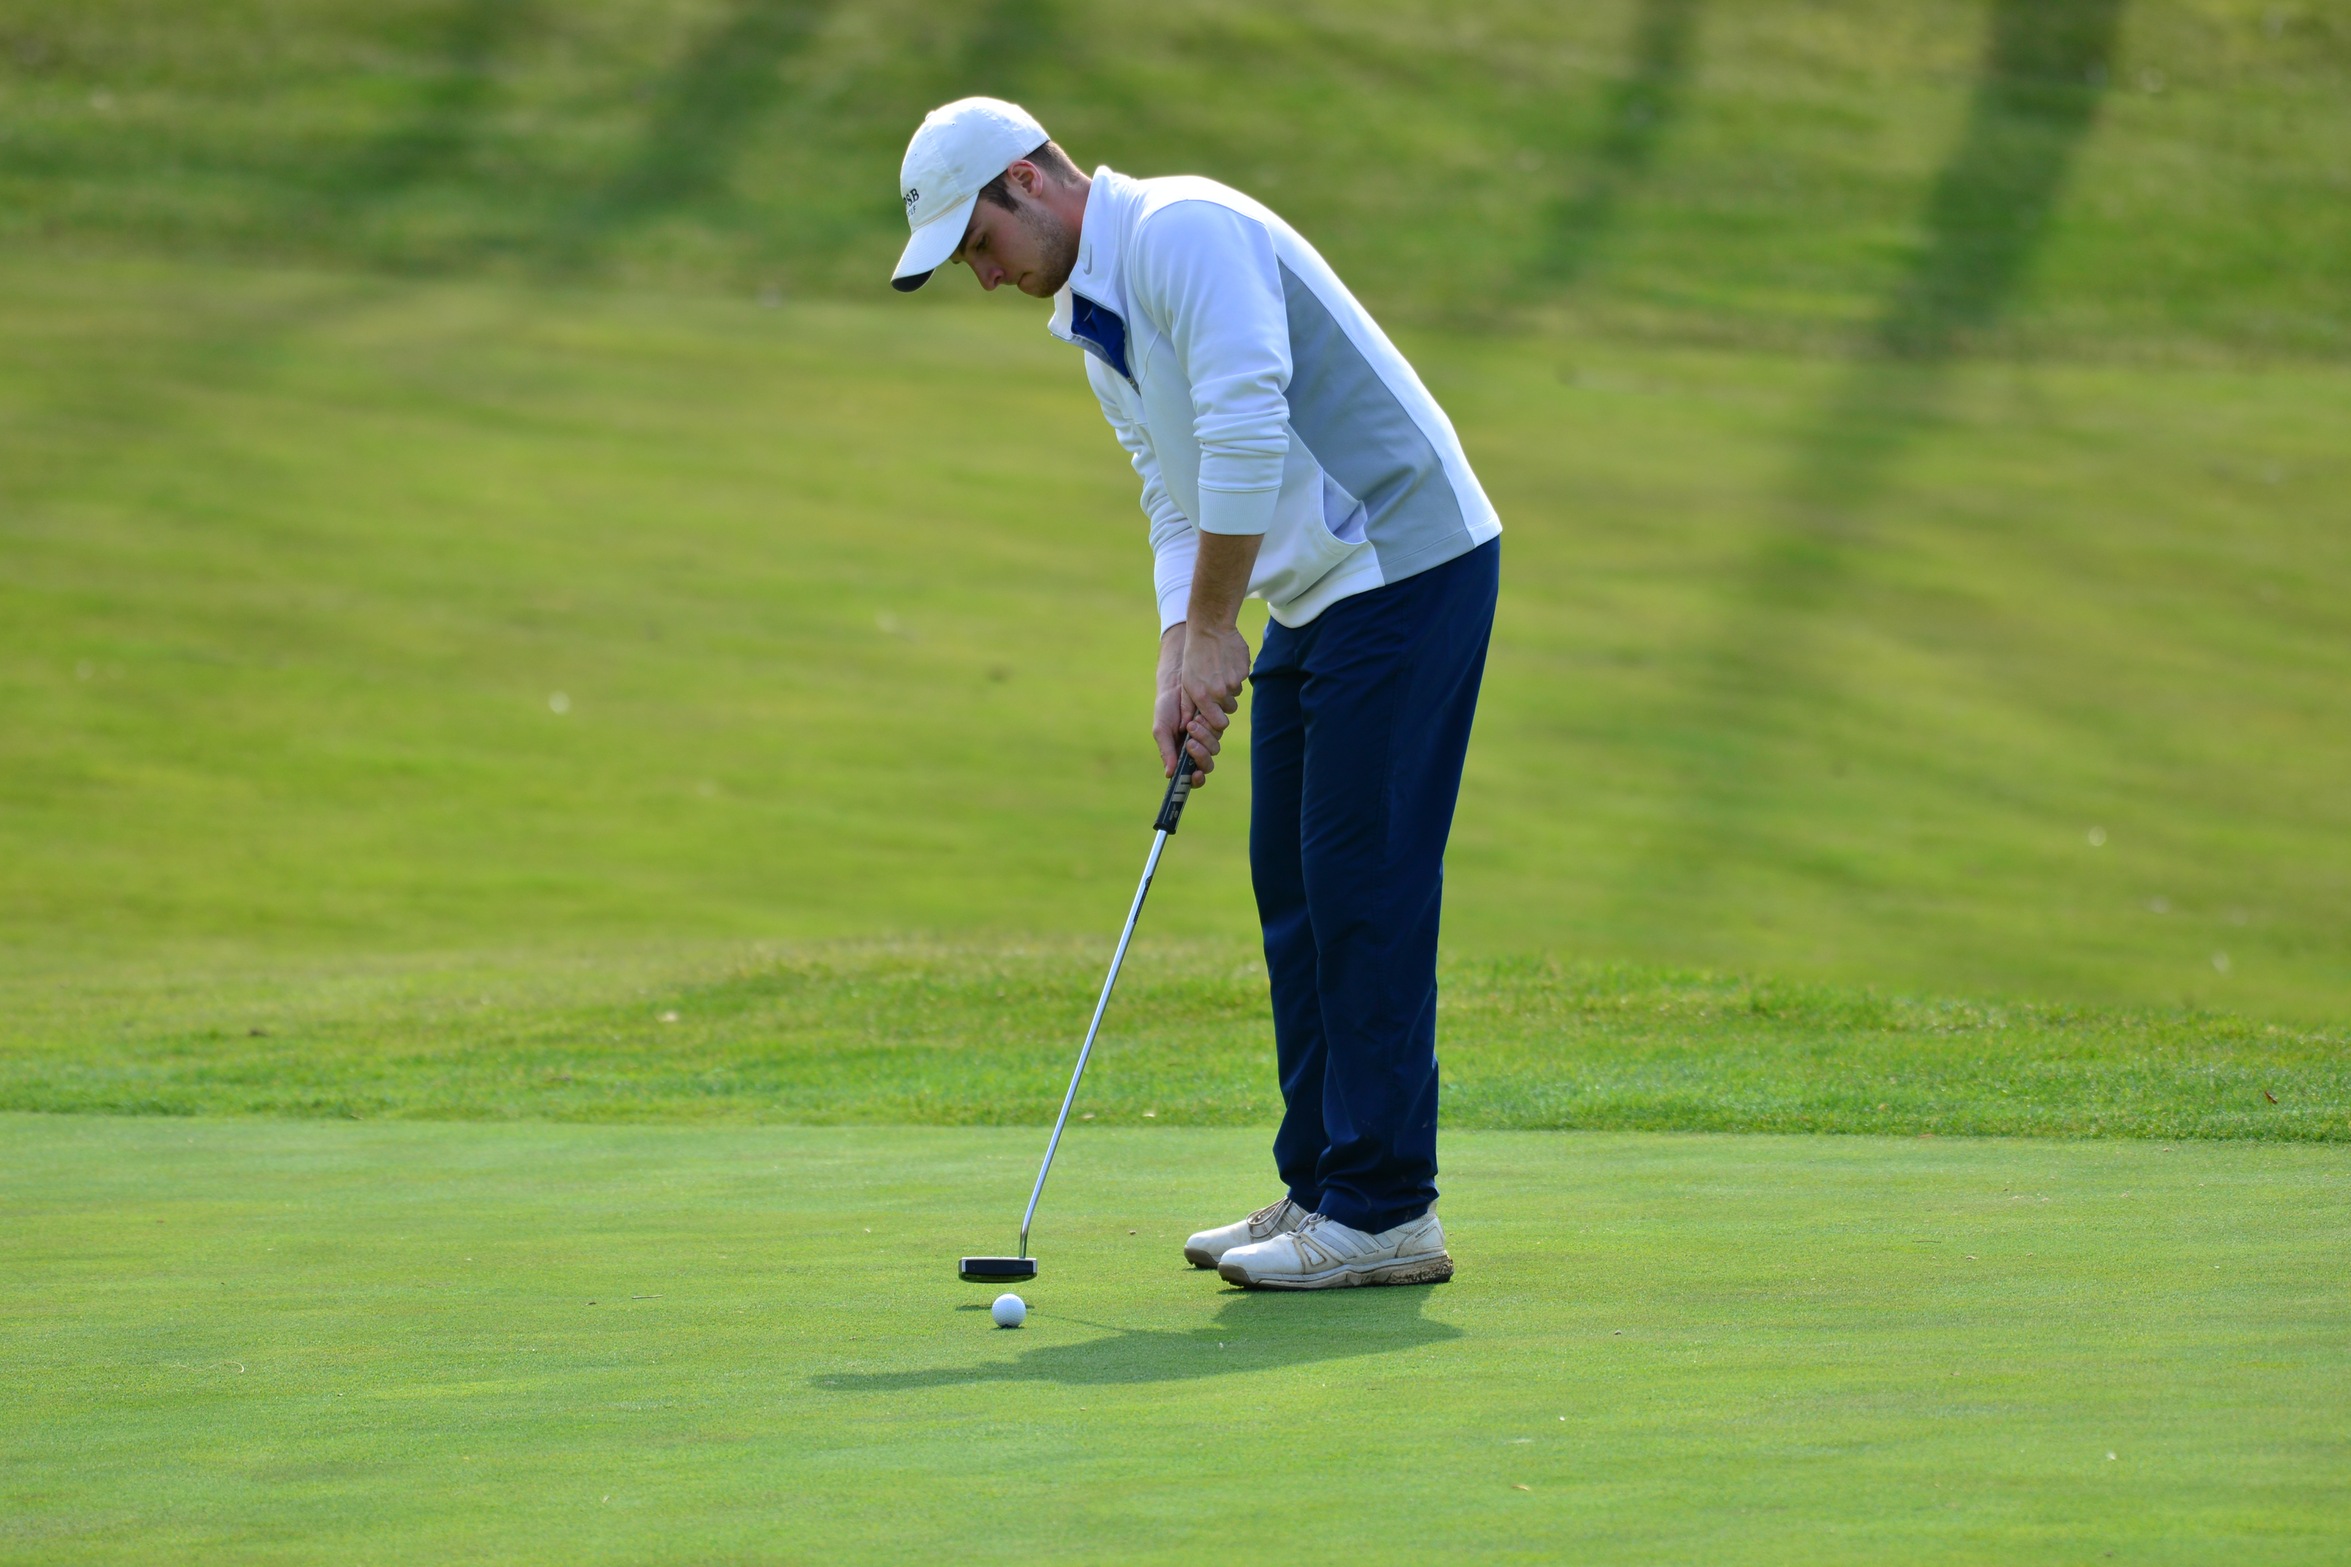 Behrend Lions Place Second at Altoona Golf Invitational